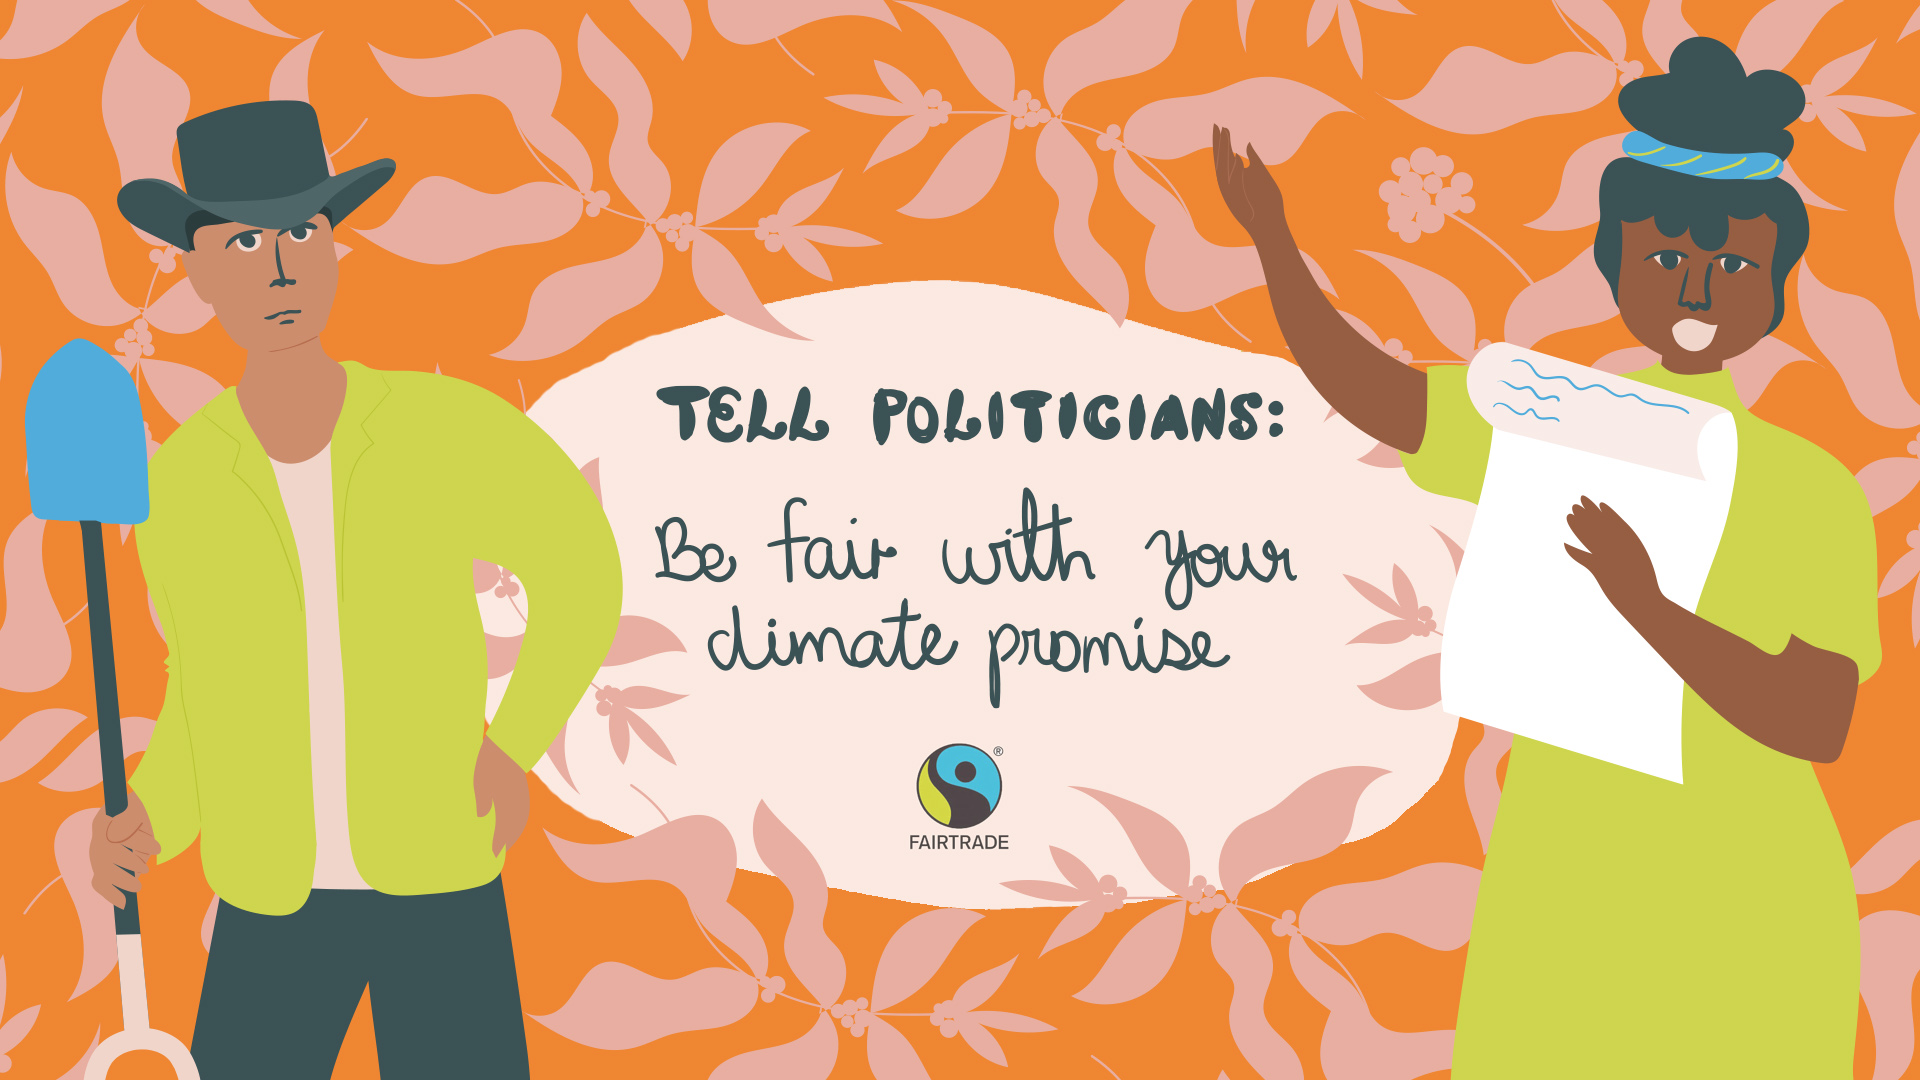 You are currently viewing ‘Keep your promises’ – COP26 climate plea from 1.8 million Fairtrade farmers, in open letter to world leaders